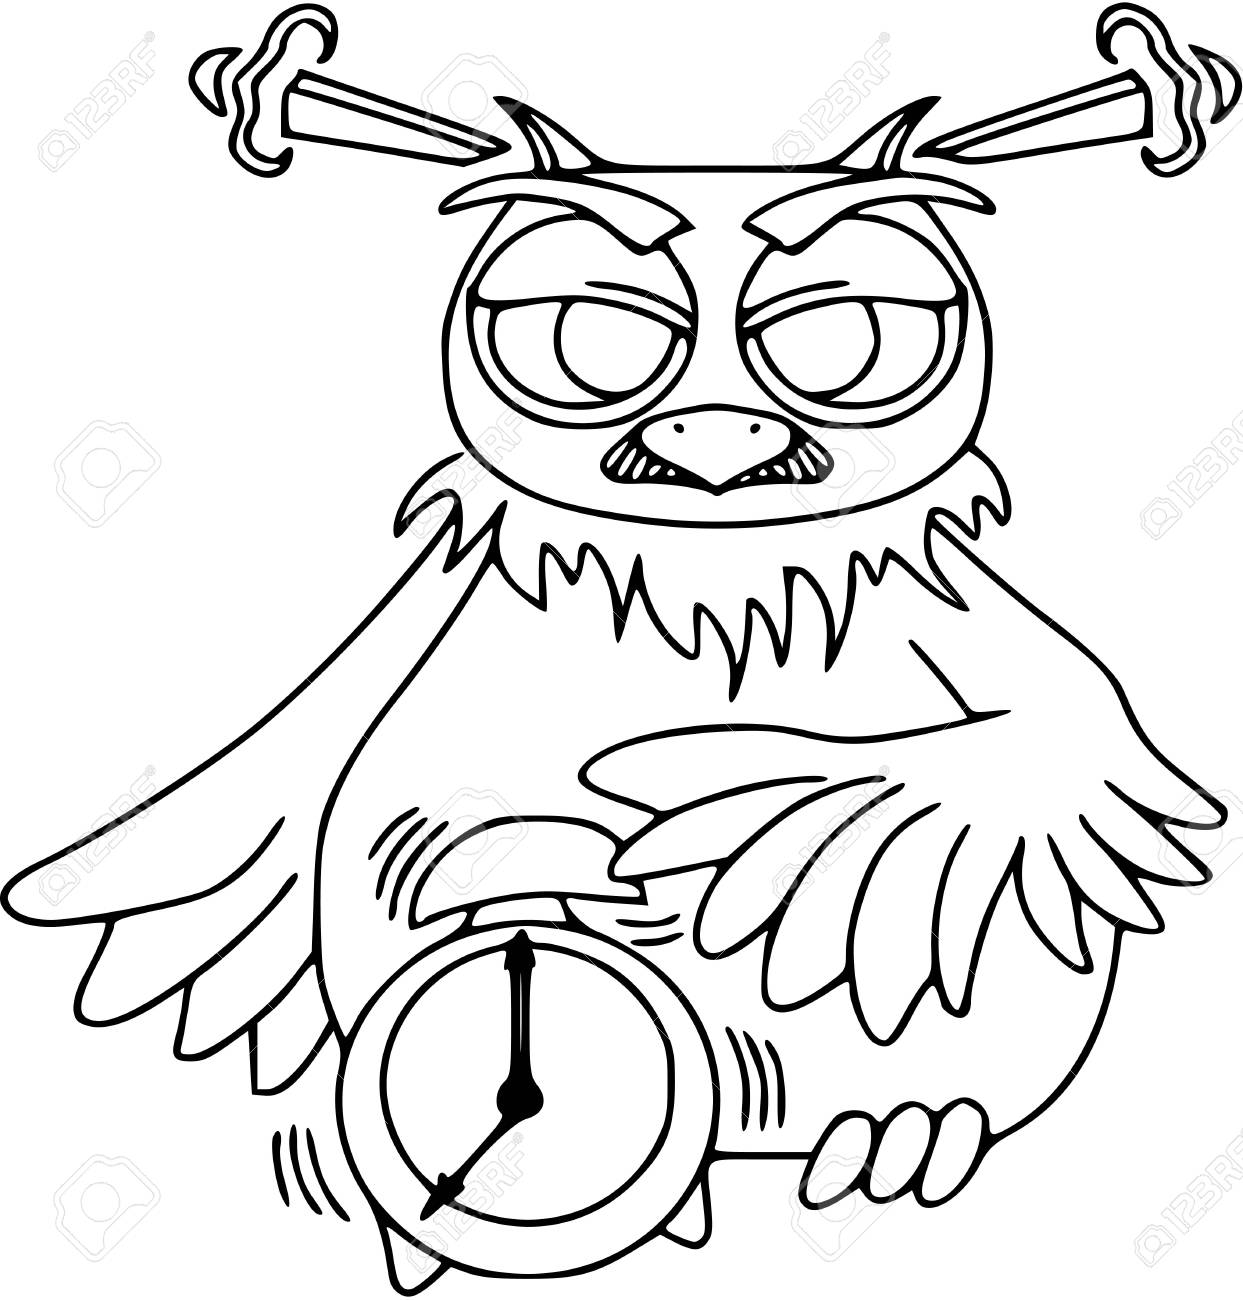 Download Owl With Clock Coloring Page - Free Printable Coloring Pages for Kids